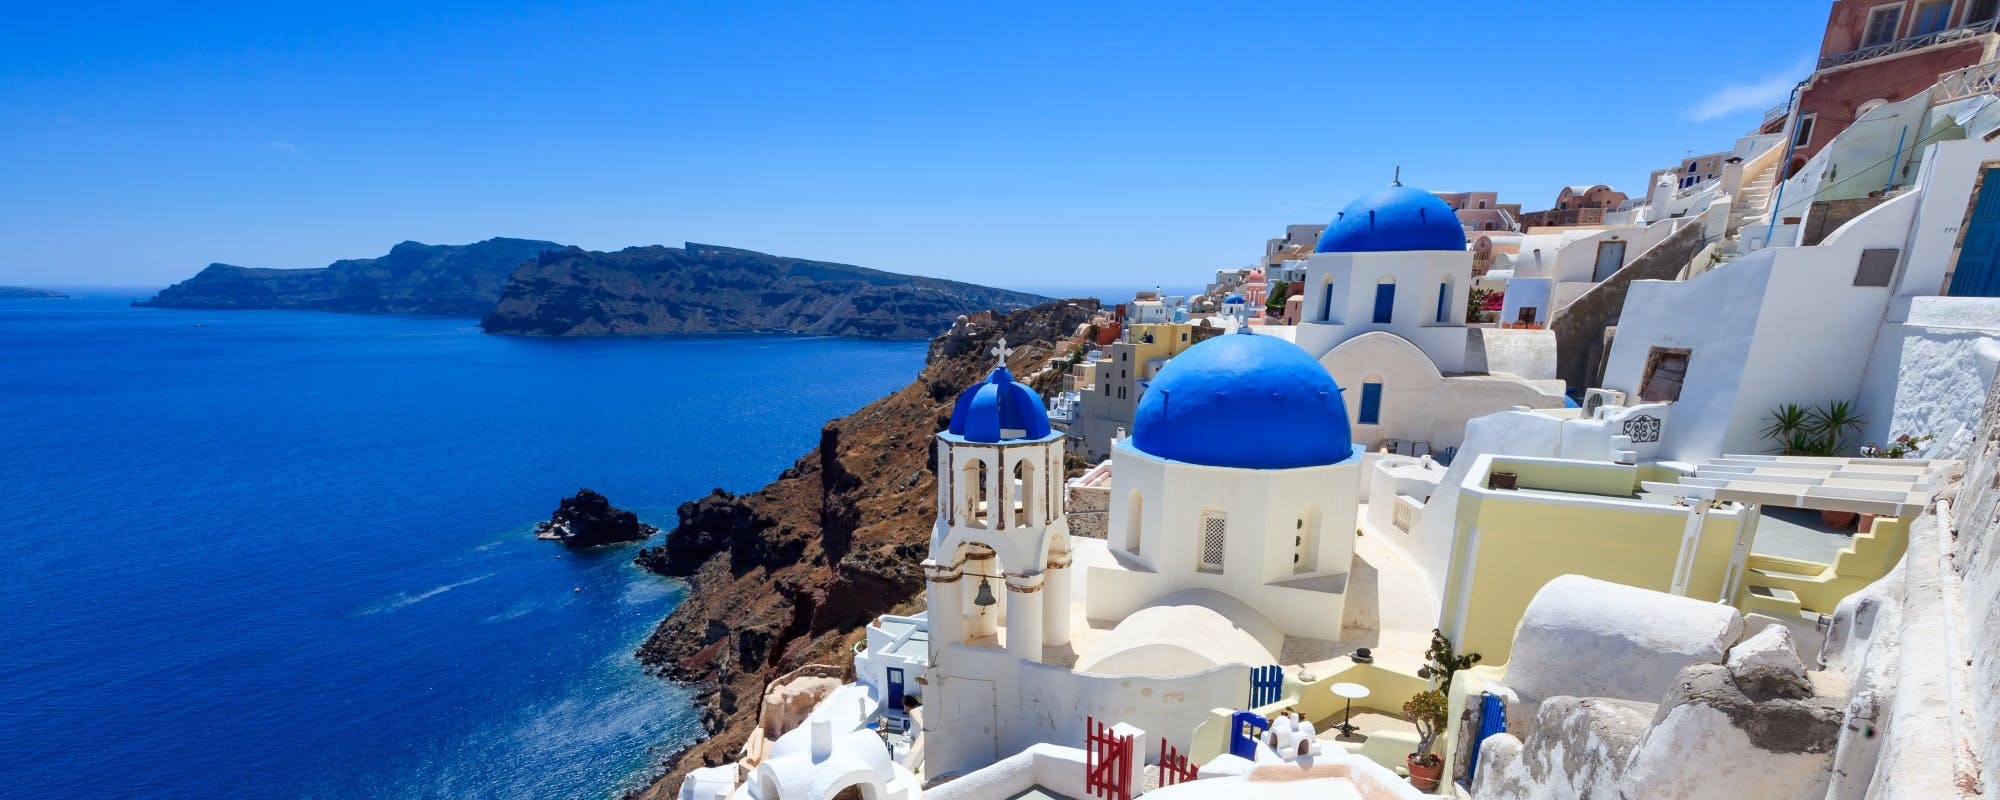 Santorini's volcano and hot springs private boat tour Musement